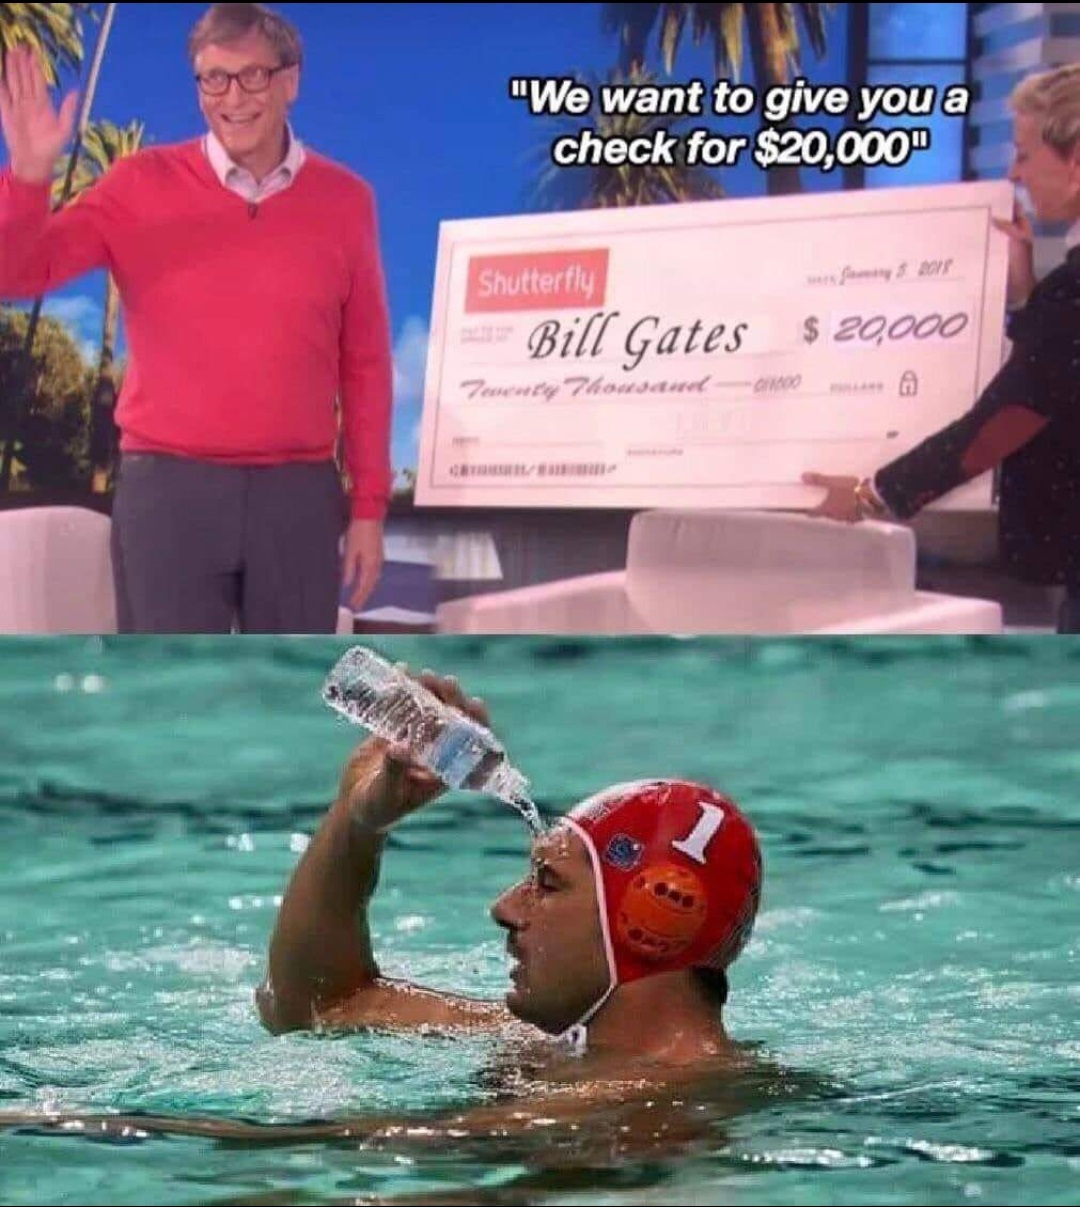 bill gates check meme - "We want to give you a check for $20,000" Shutterfly Bill Gates $ 20,000 Tente Thousand O